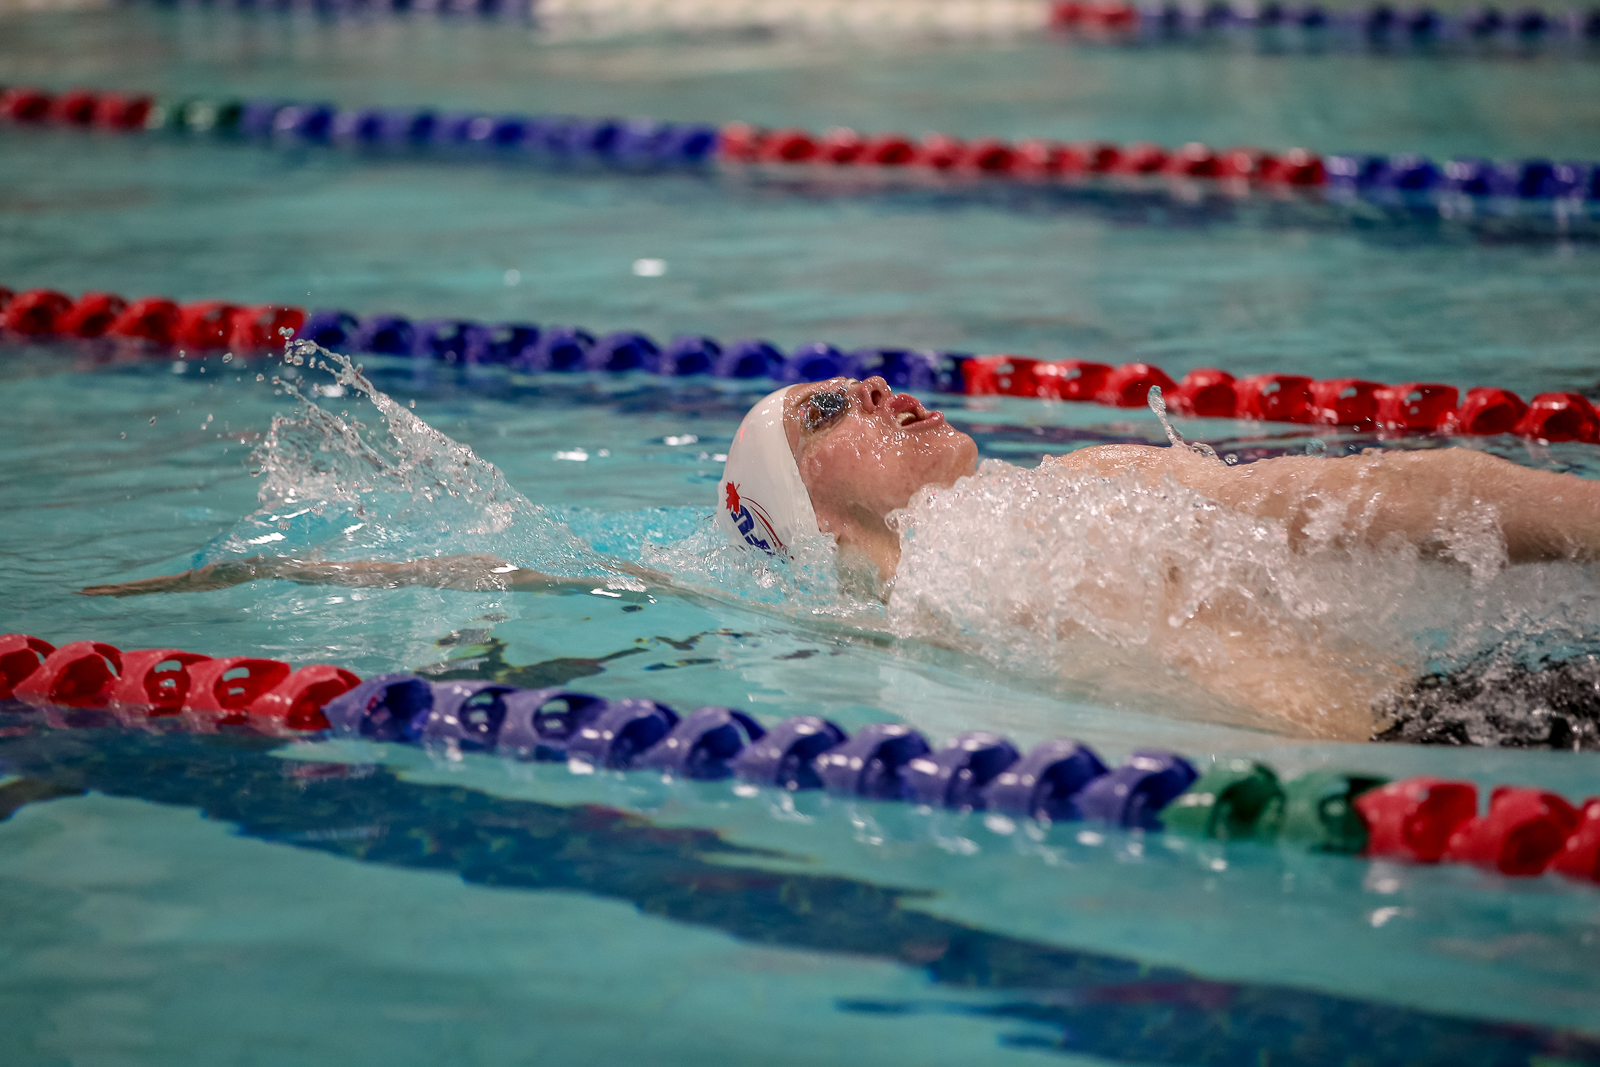 SFU swimmer Jayden Cole pictured in the water performing a backstroke.